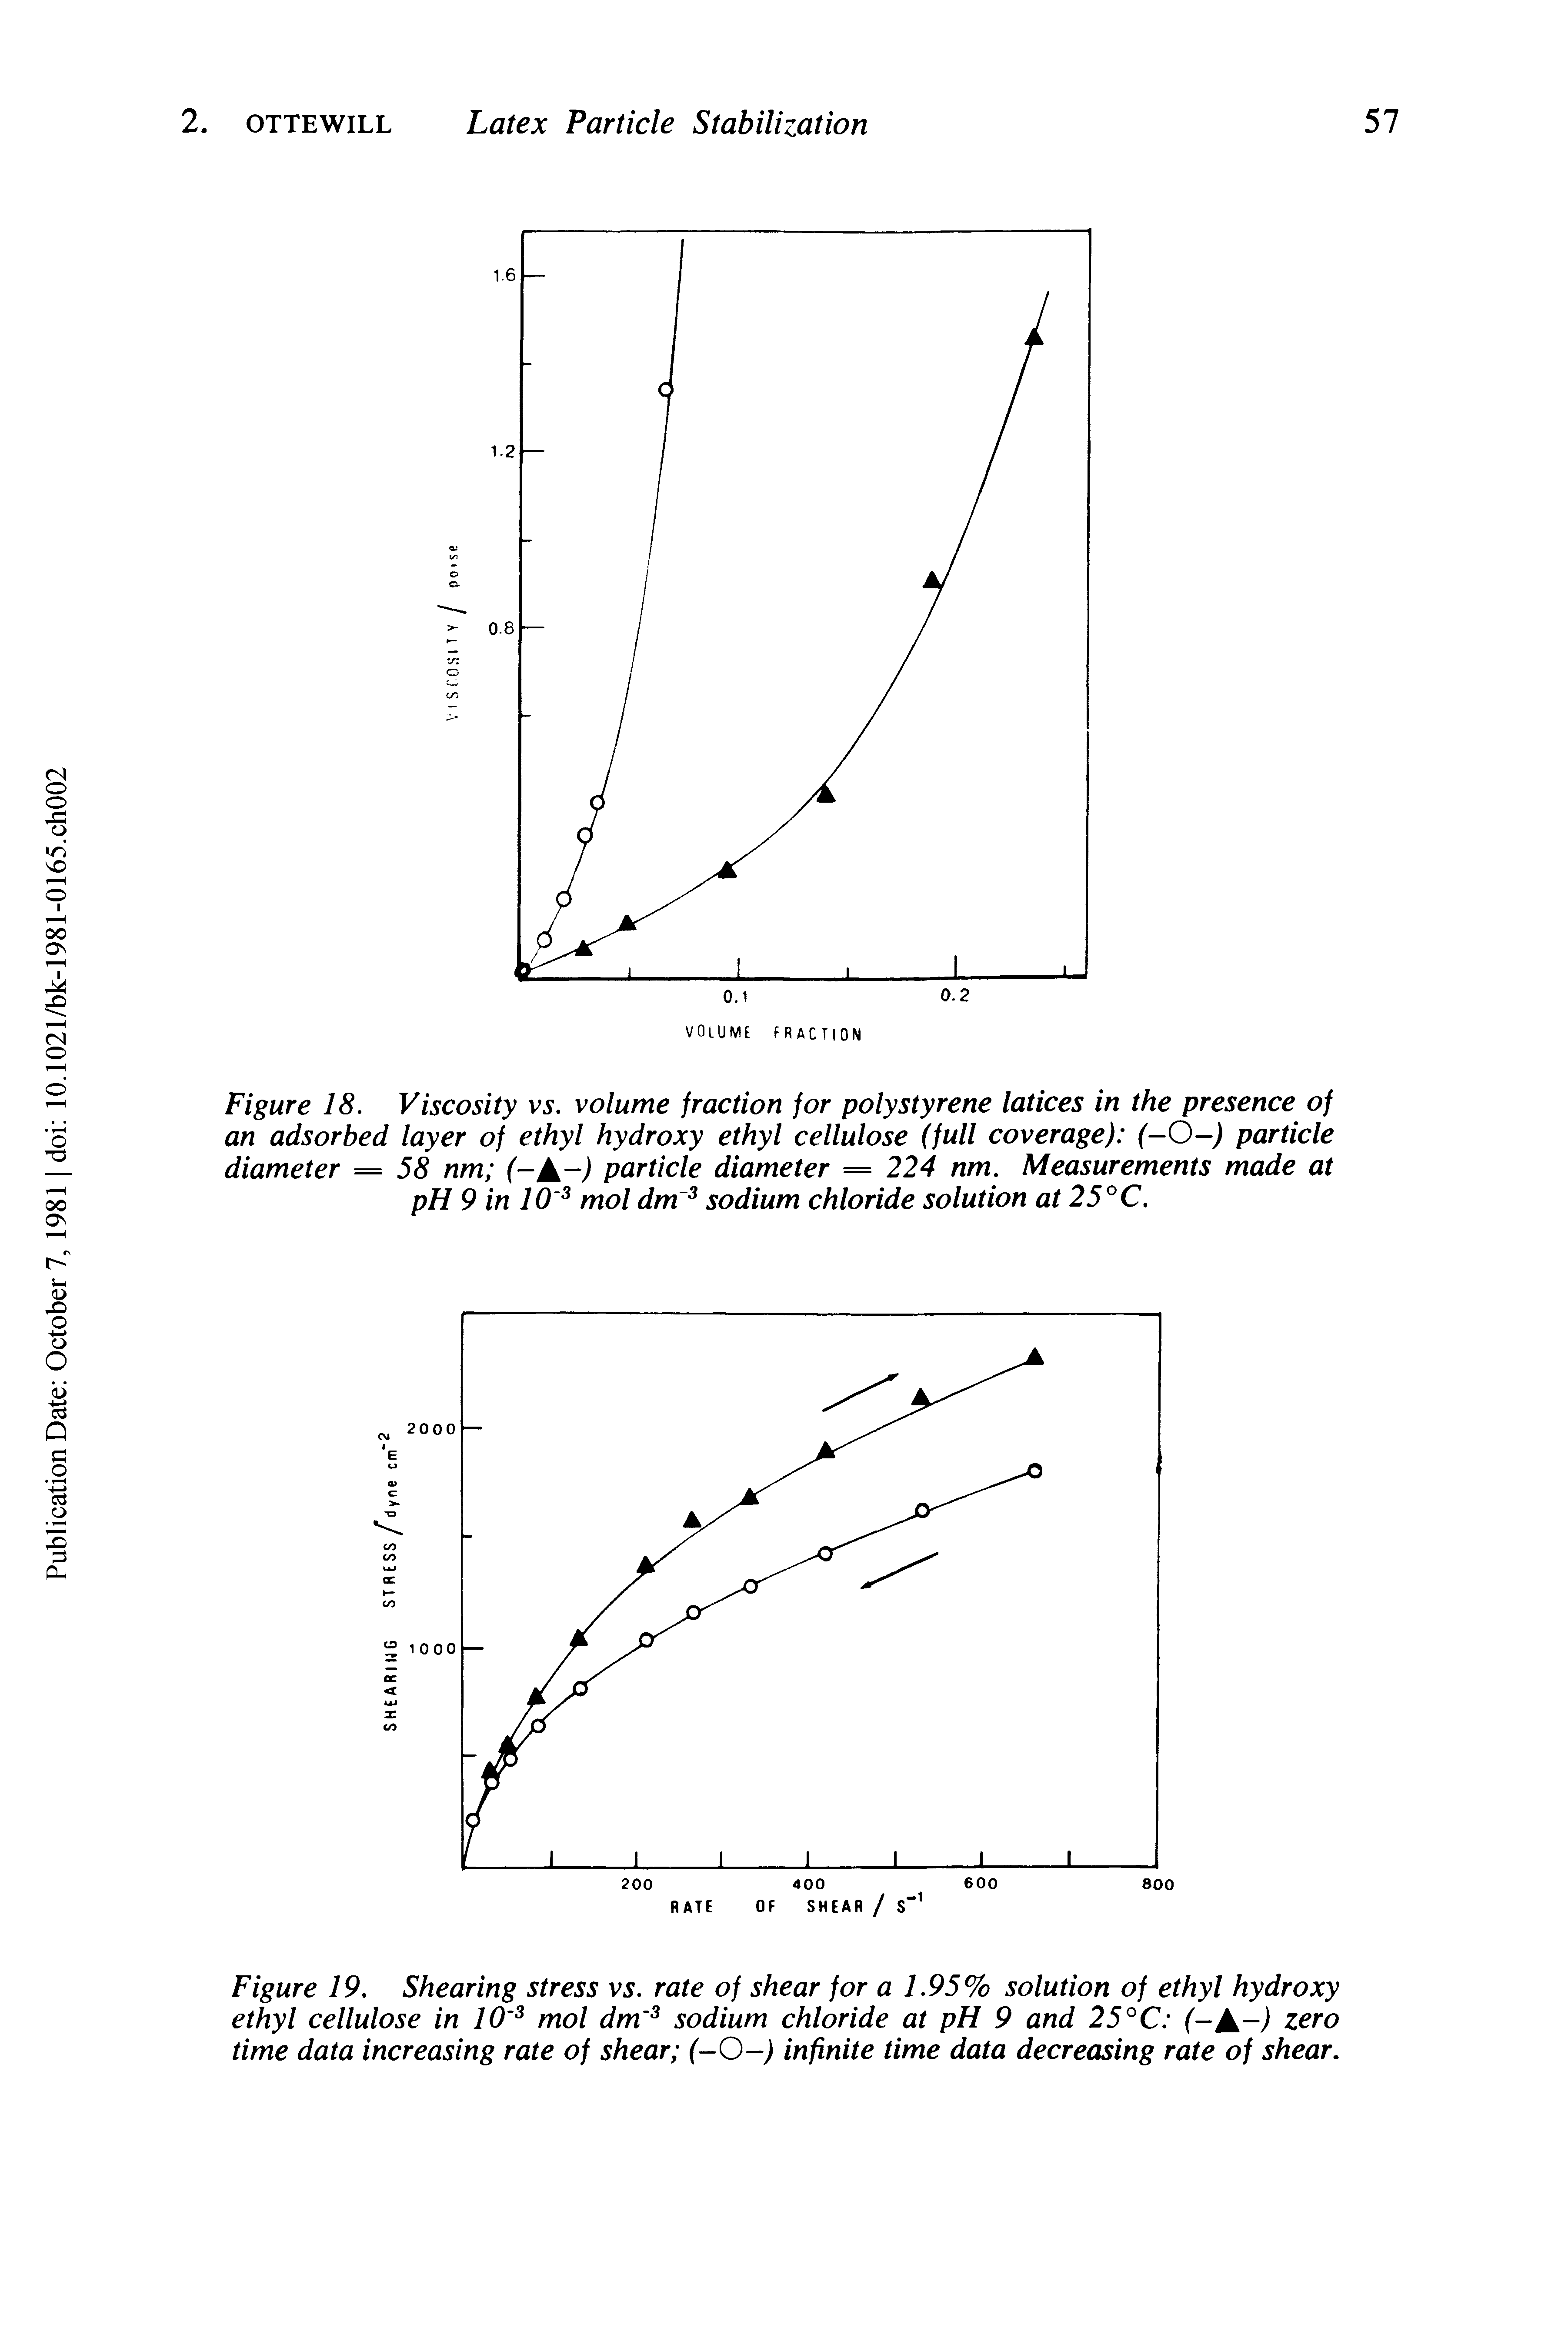 Figure 18. Viscosity vs. volume fraction for polystyrene latices in the presence of an adsorbed layer of ethyl hydroxy ethyl cellulose (full coverage) (-O-) particle diameter = 58 nm (-Jk ) particle diameter = 224 nm. Measurements made at pH 9 in 10 3 mol dm 3 sodium chloride solution at 25°C.